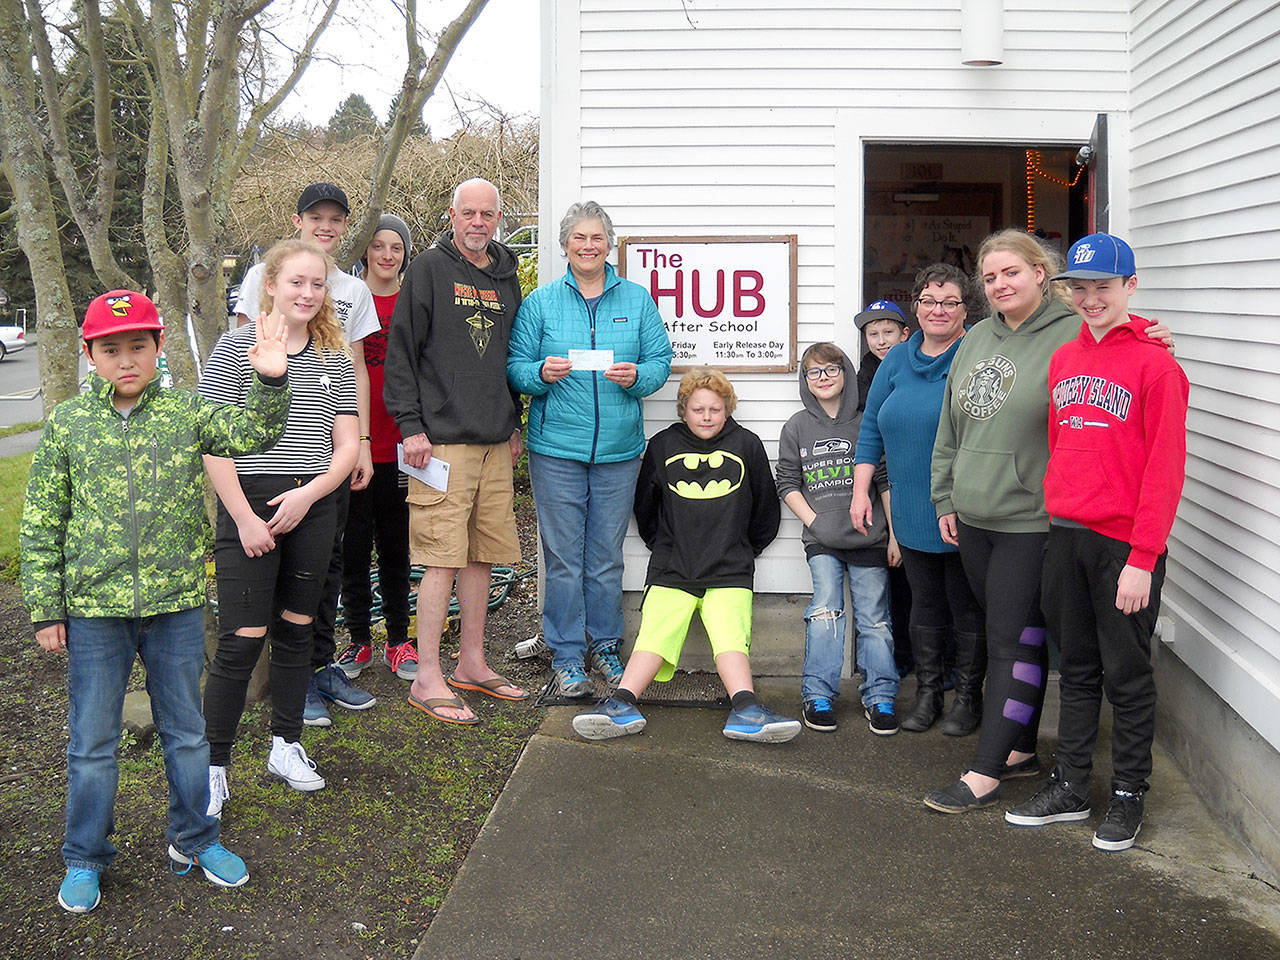 Contributed photo — Bayview Farmers Market president Shirlee Read presented a $500 donation to The HUB in early March. Also pictured are Bruce Allen, president of The HUB board, Shelly Rempa, program manager, Azrael Rempa, assistant, and a few of the regular HUB patrons.